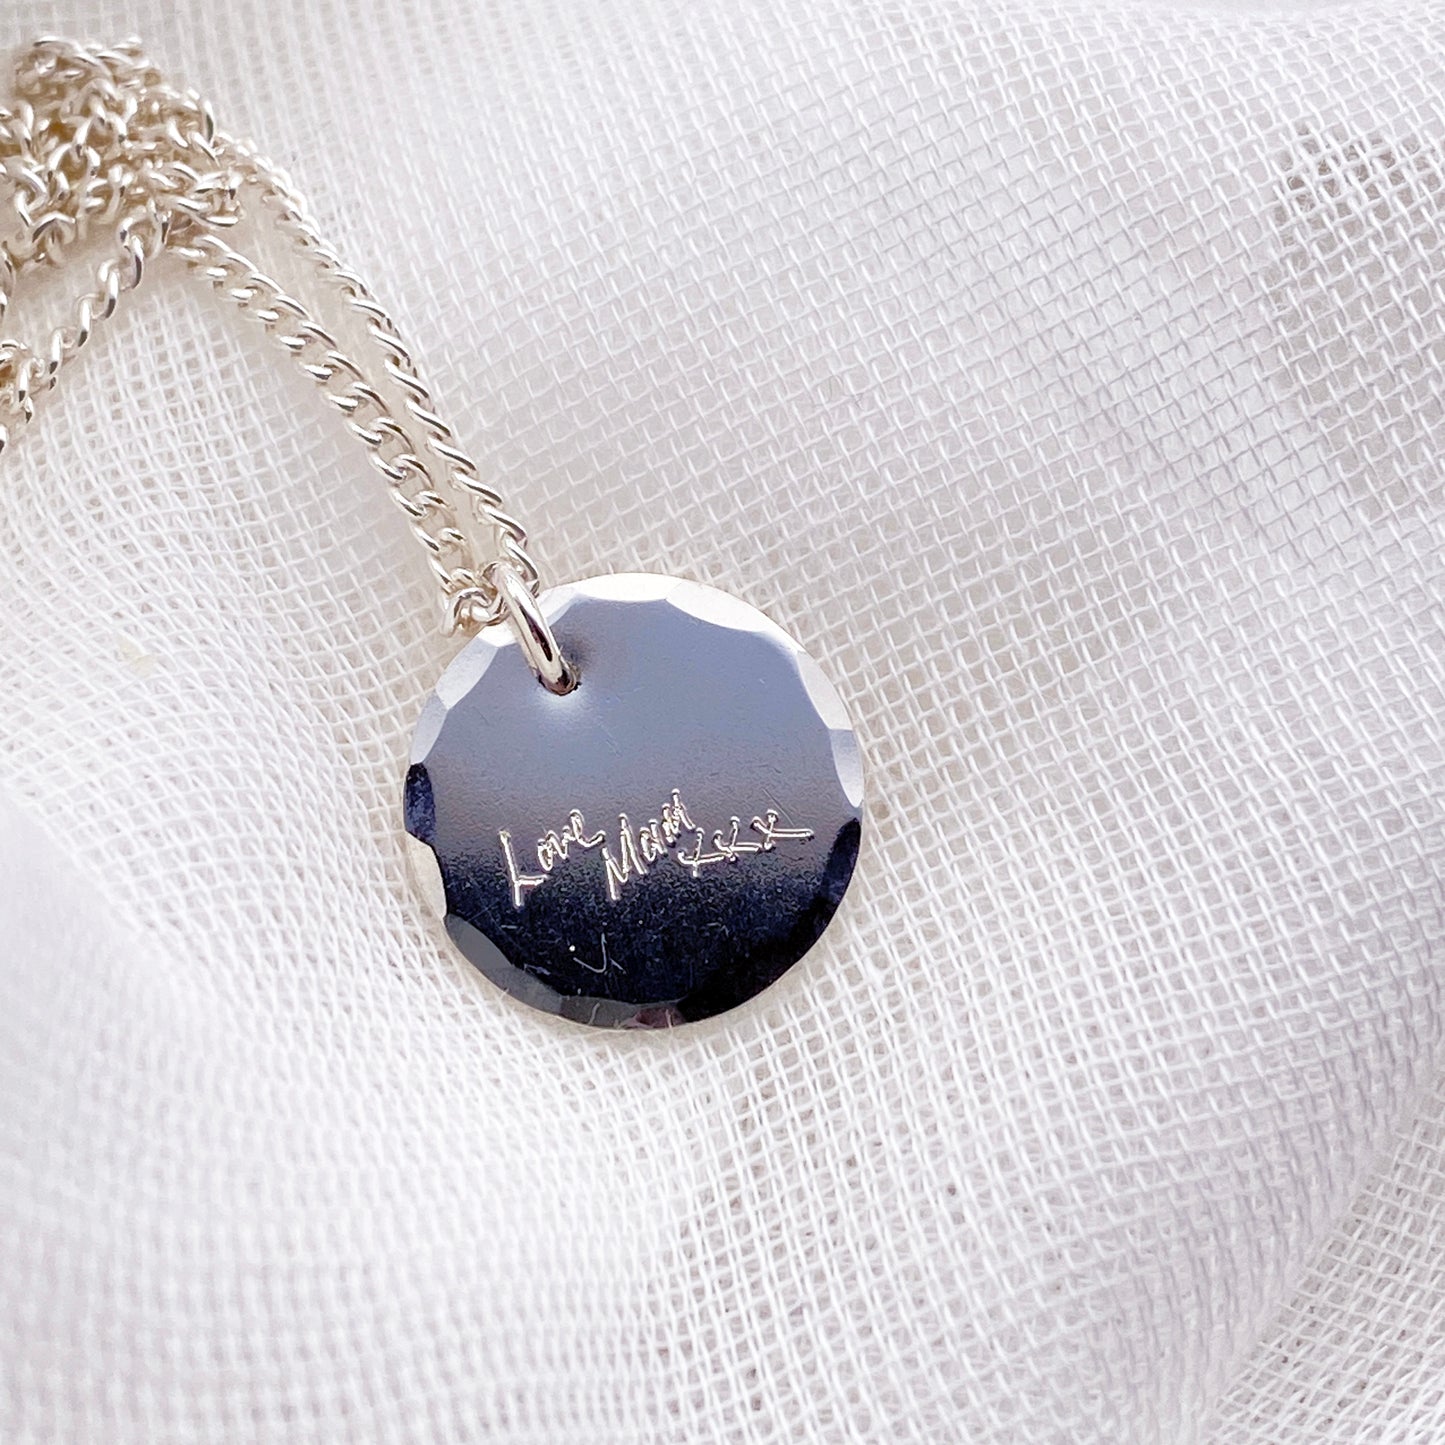 Textured edge handwriting pendant necklace in sterling silver - round